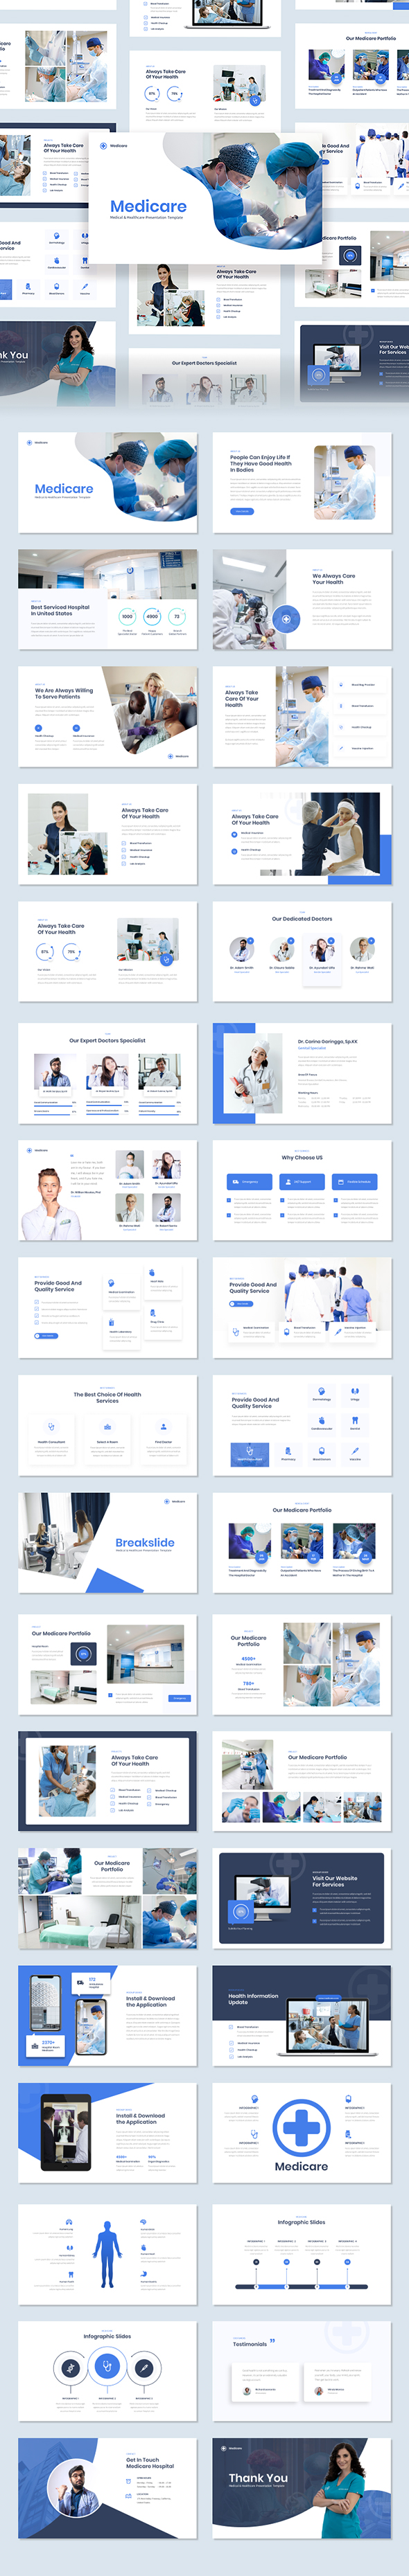 Medicare - Medical & Healthcare PowerPoint Template